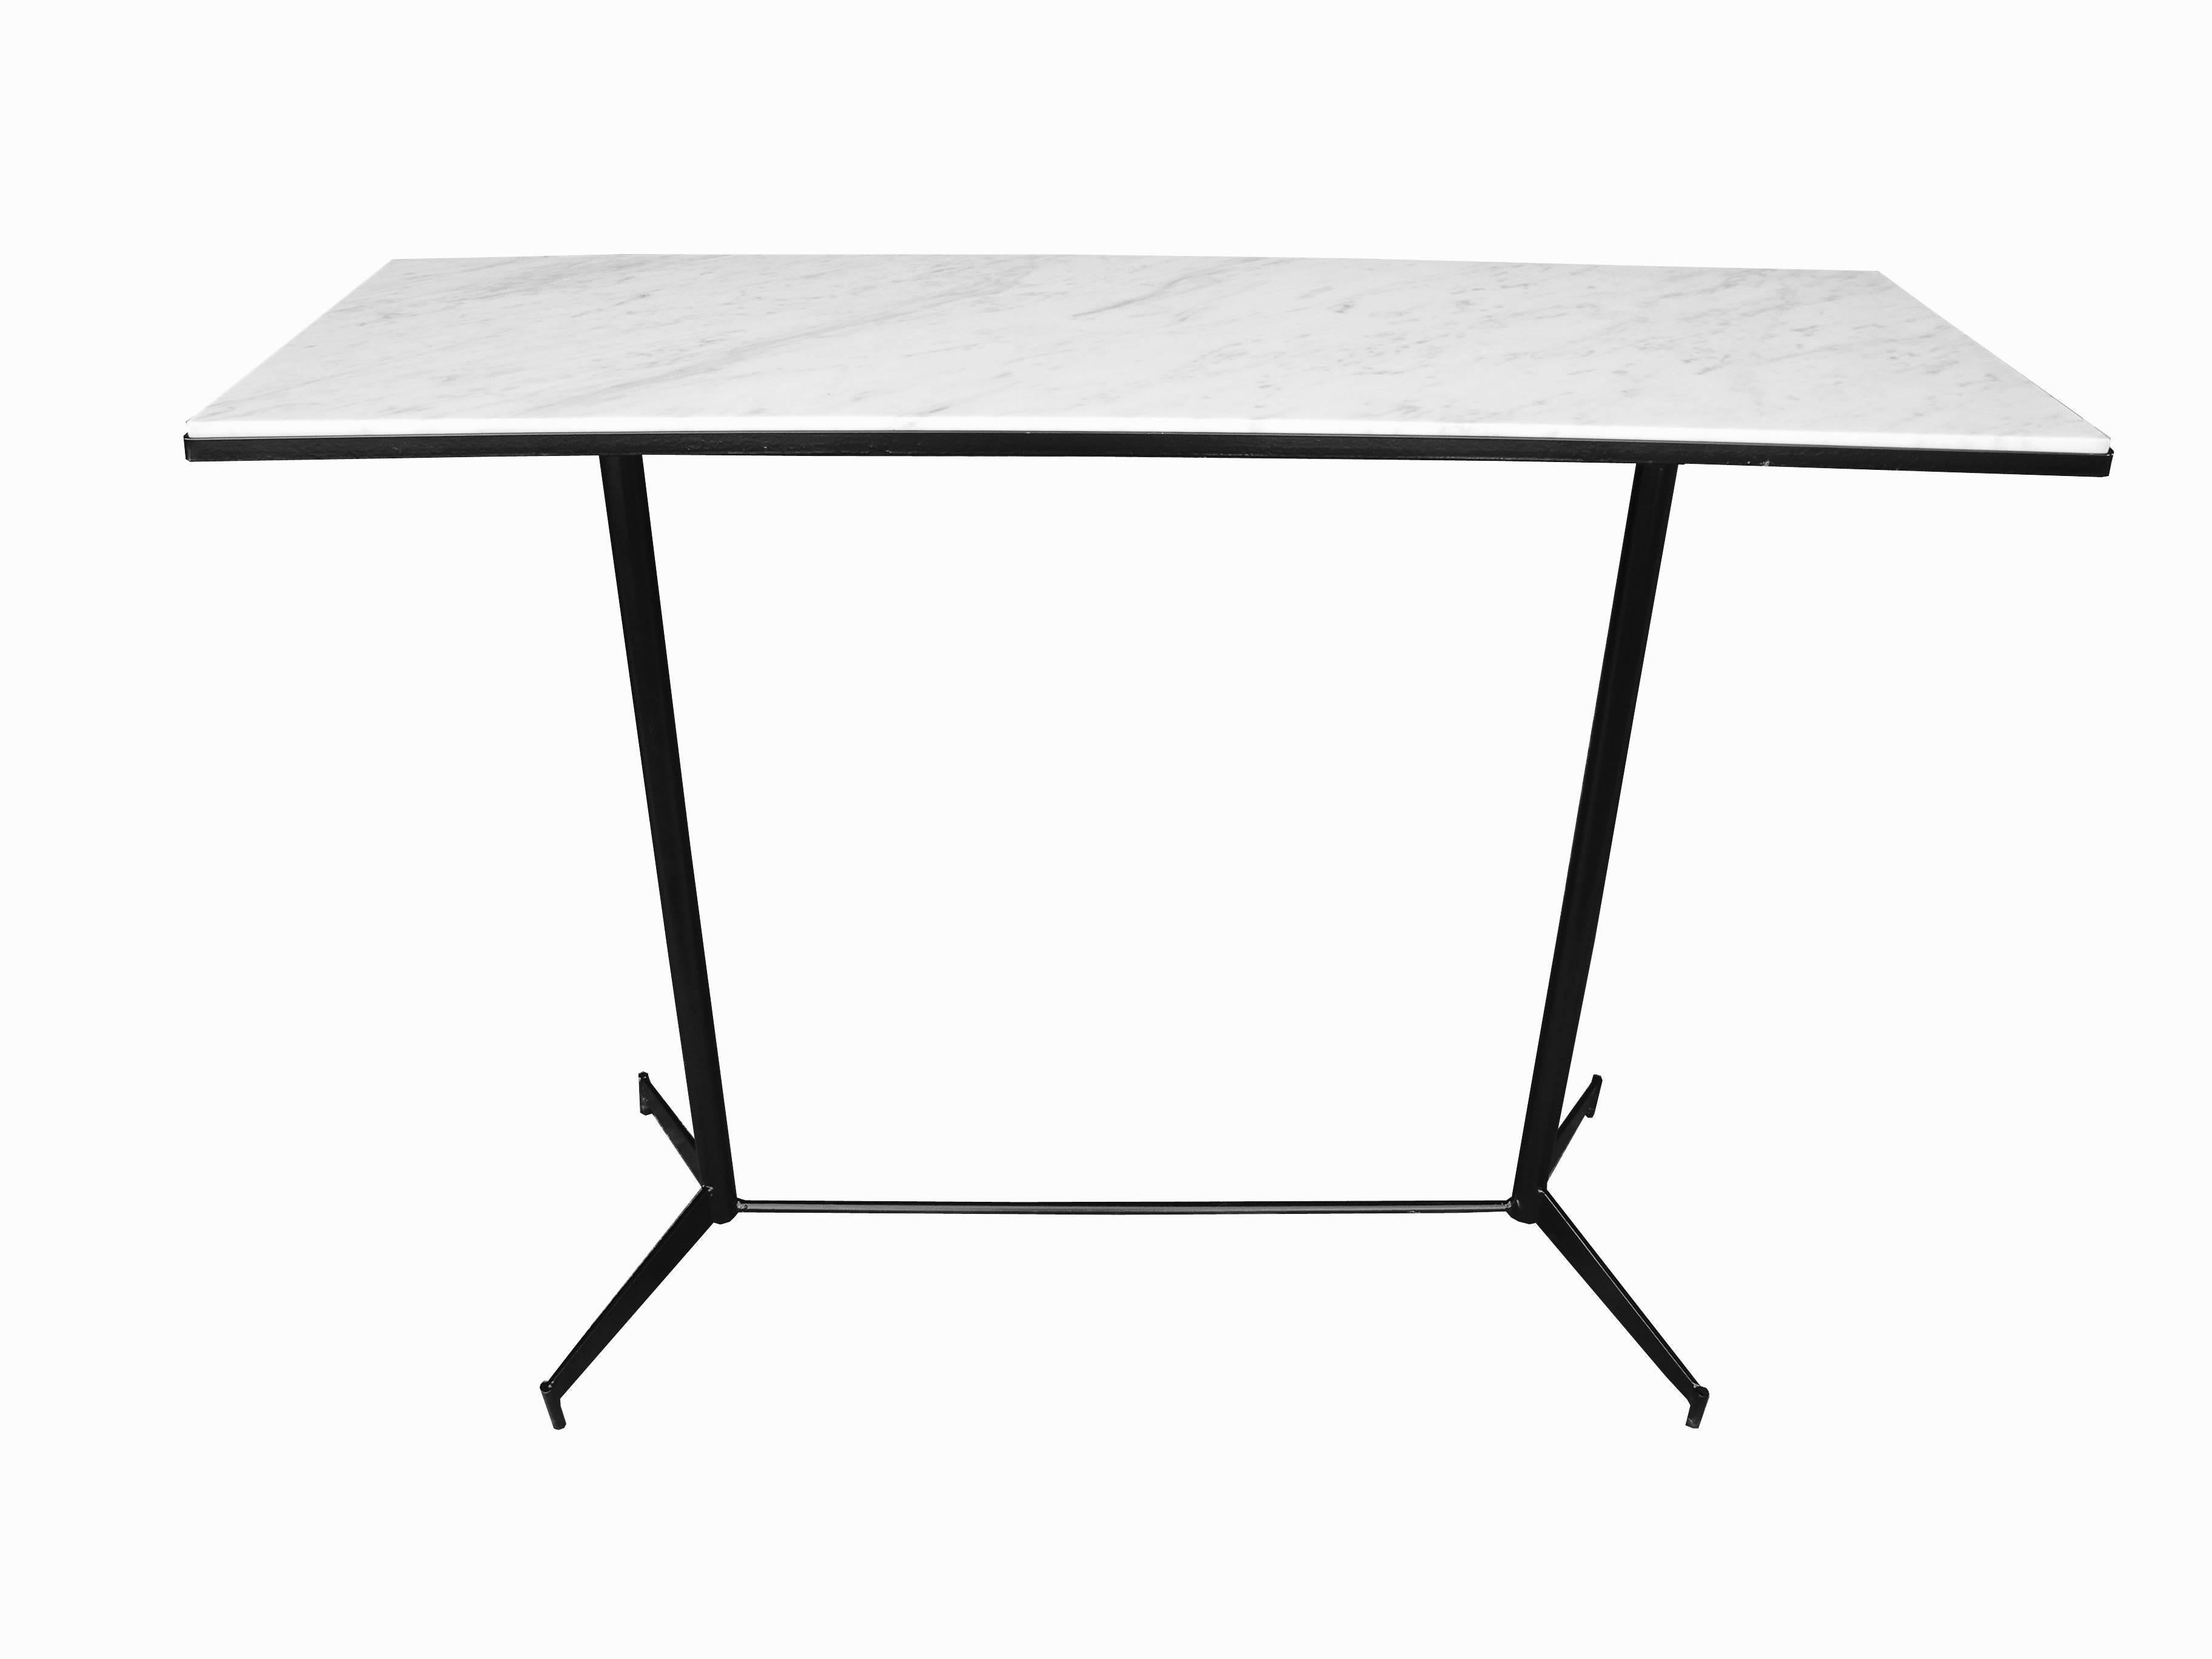 This console or bar is made of painted black steel frame with a white Carrara marble top. Vintage, 1950s and in the style of Paul McCobb. Two available, sold and listed separately. Made for indoor or outdoor.